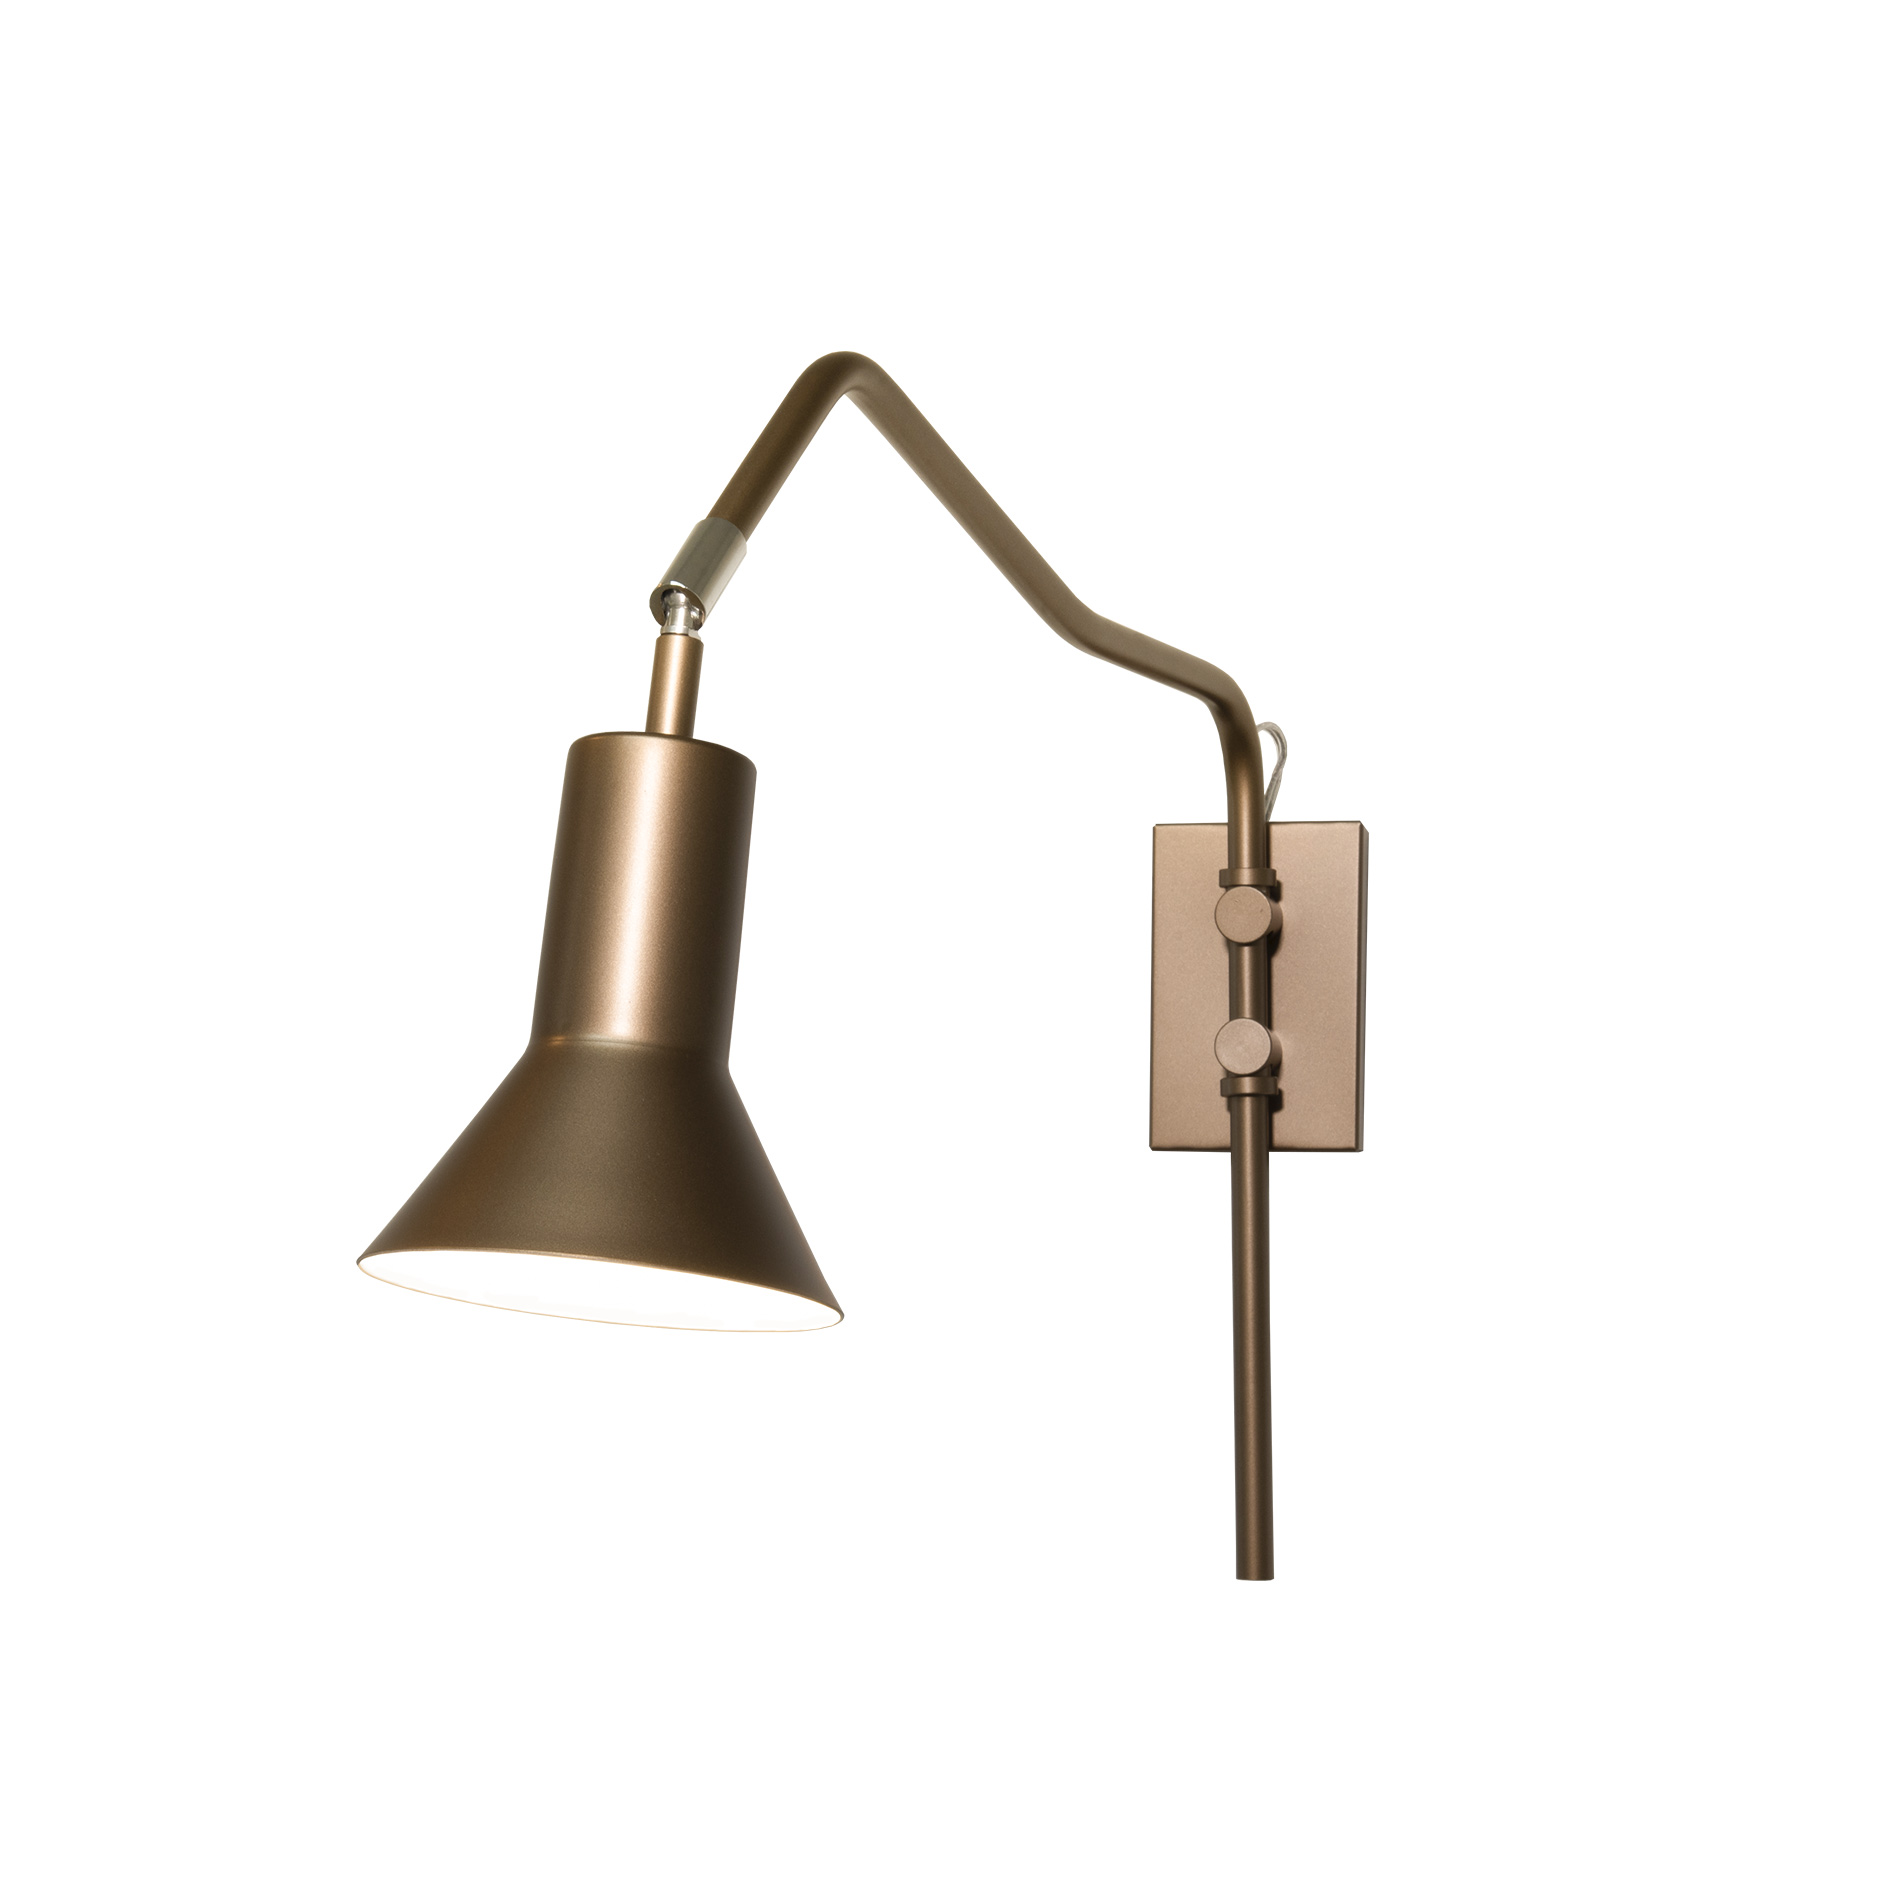 Lanterna Wall Sconce with rod